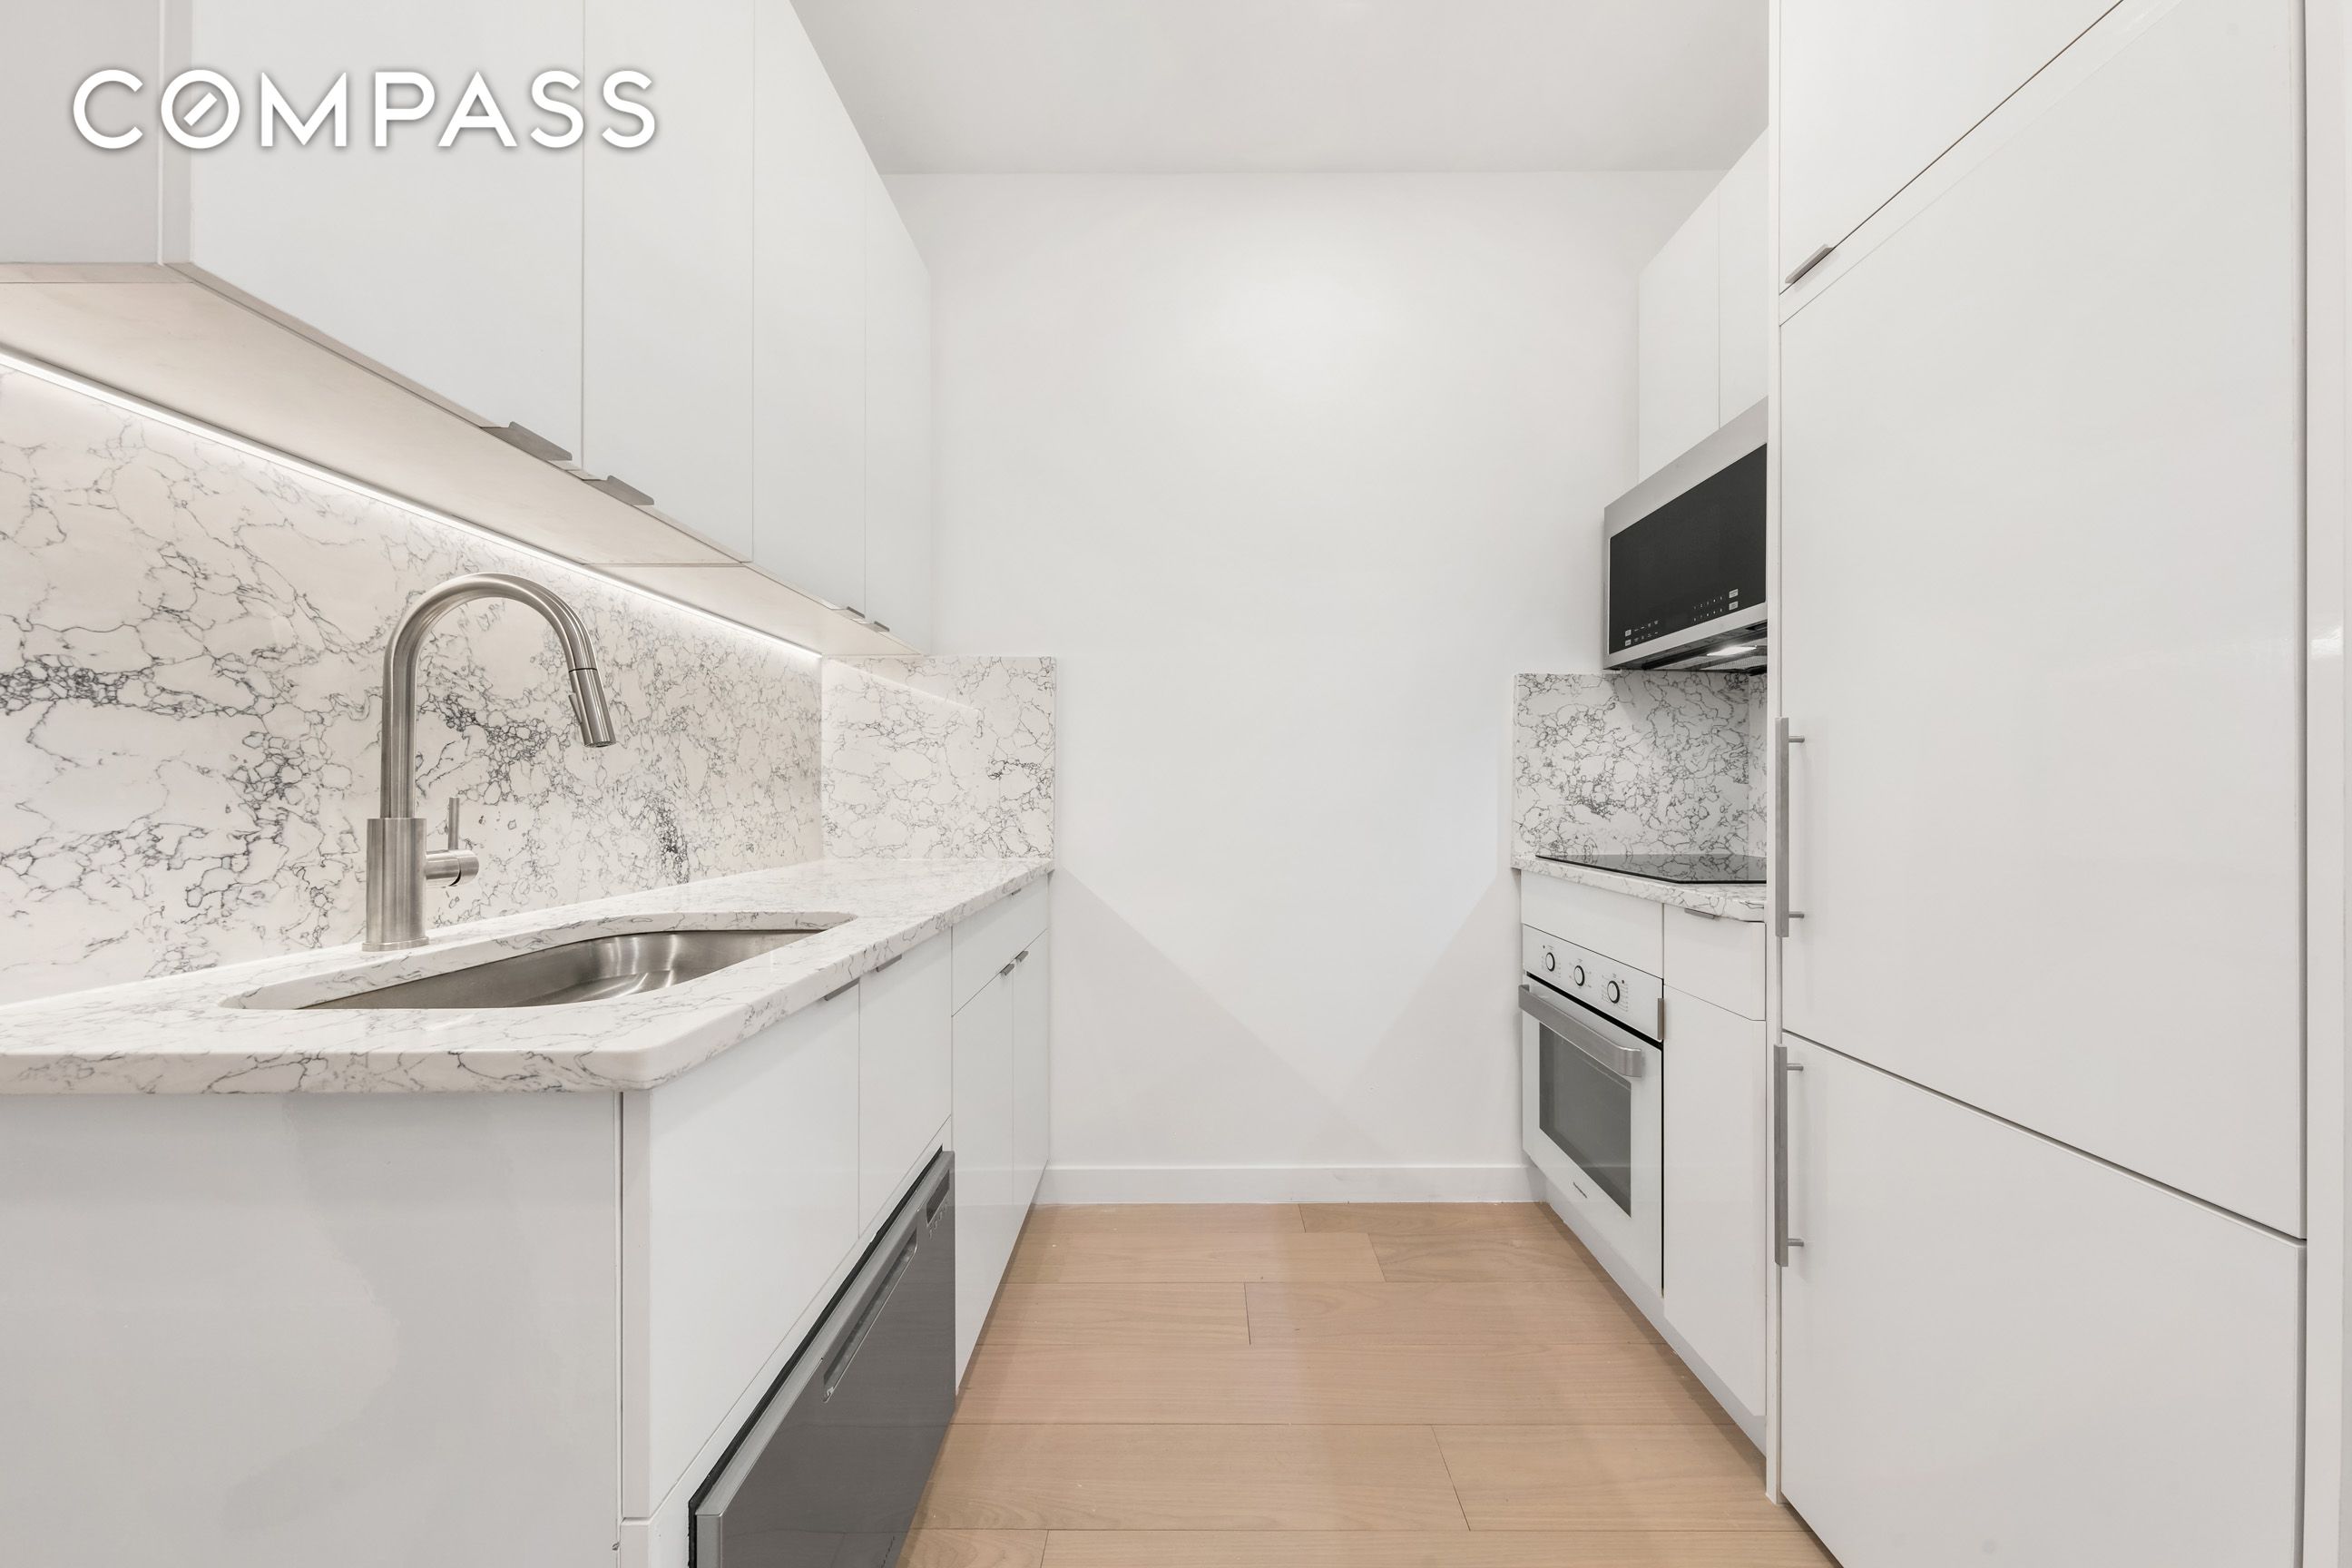 177 East 3rd Street 1W, East Village, Downtown, NYC - 2 Bedrooms  

5 Rooms - 